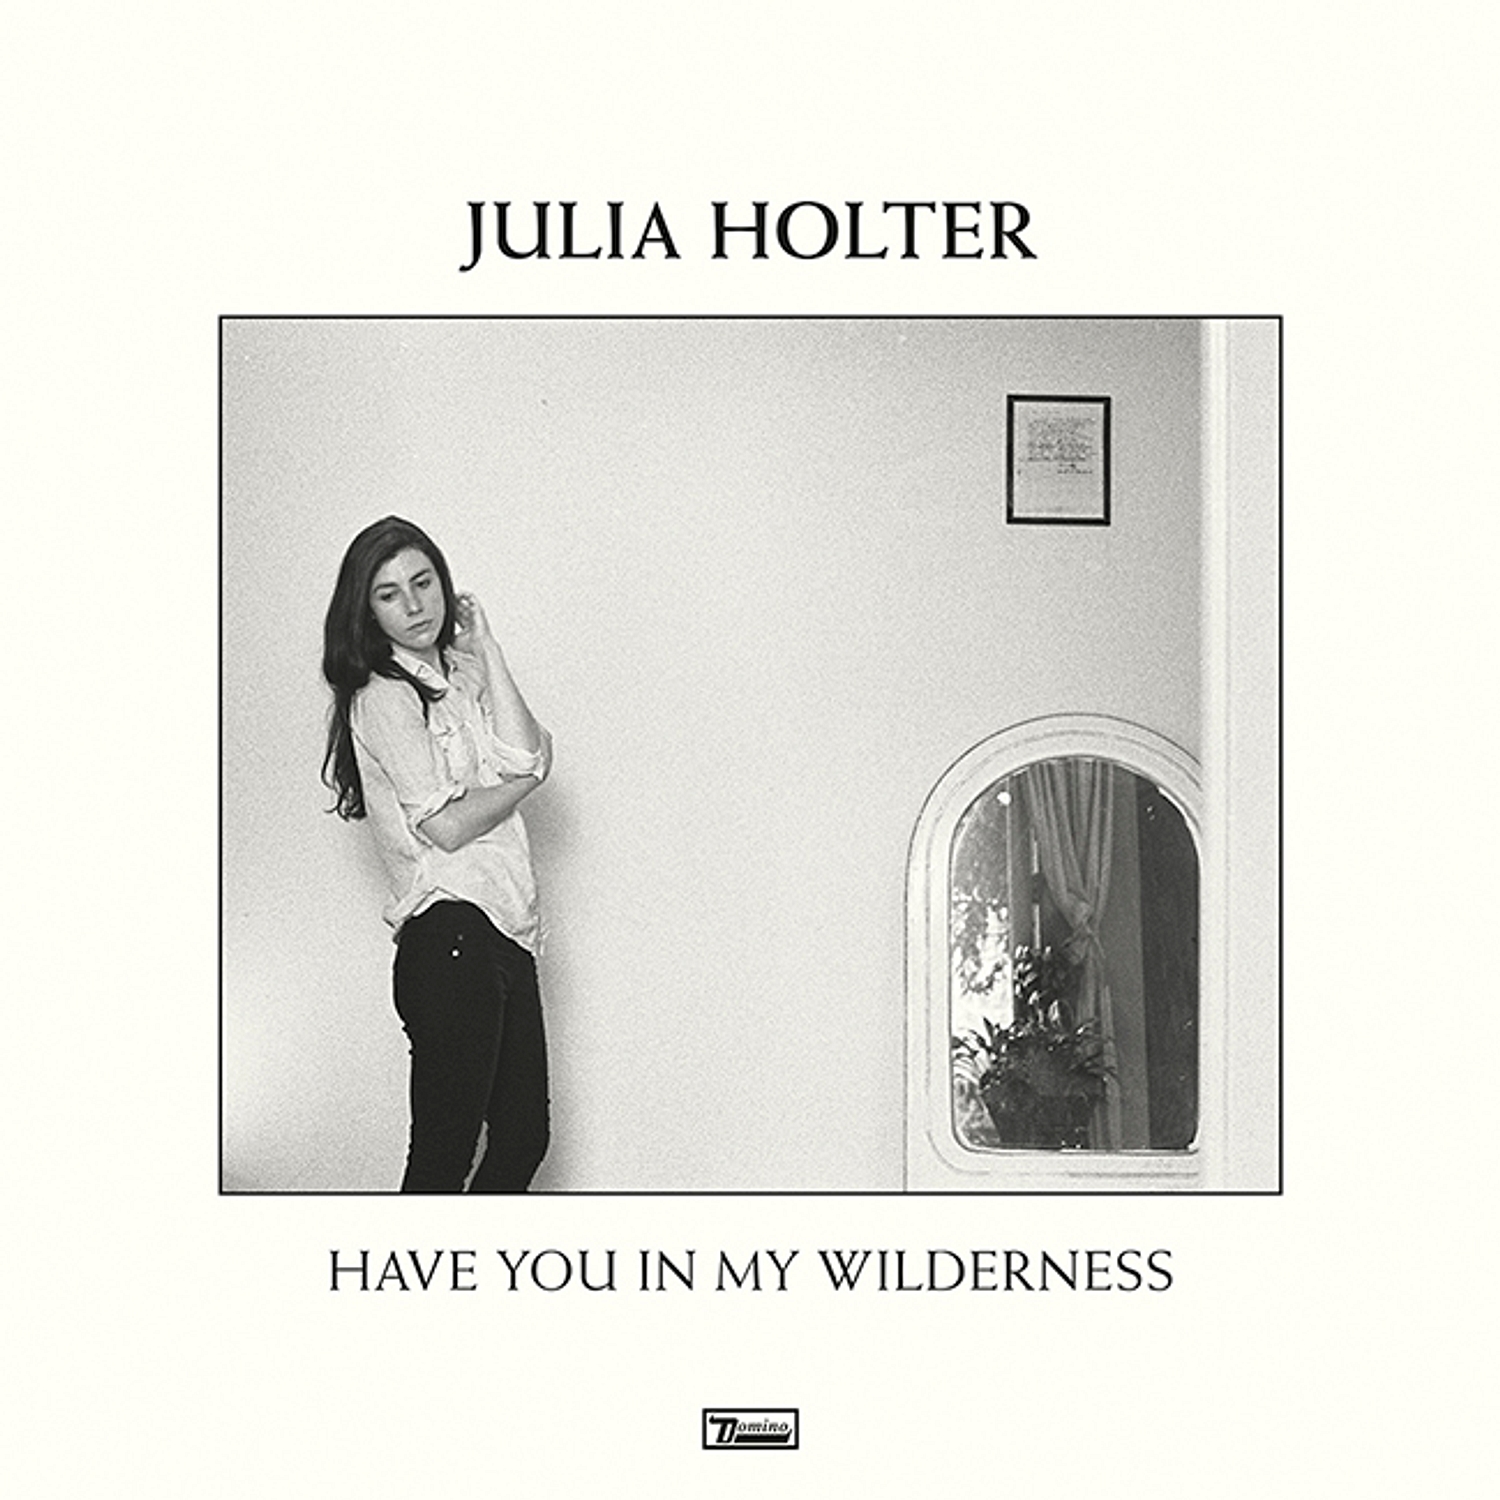 Julia Holter announces ‘Have You In My Wilderness’ album, shares ‘Feel You’